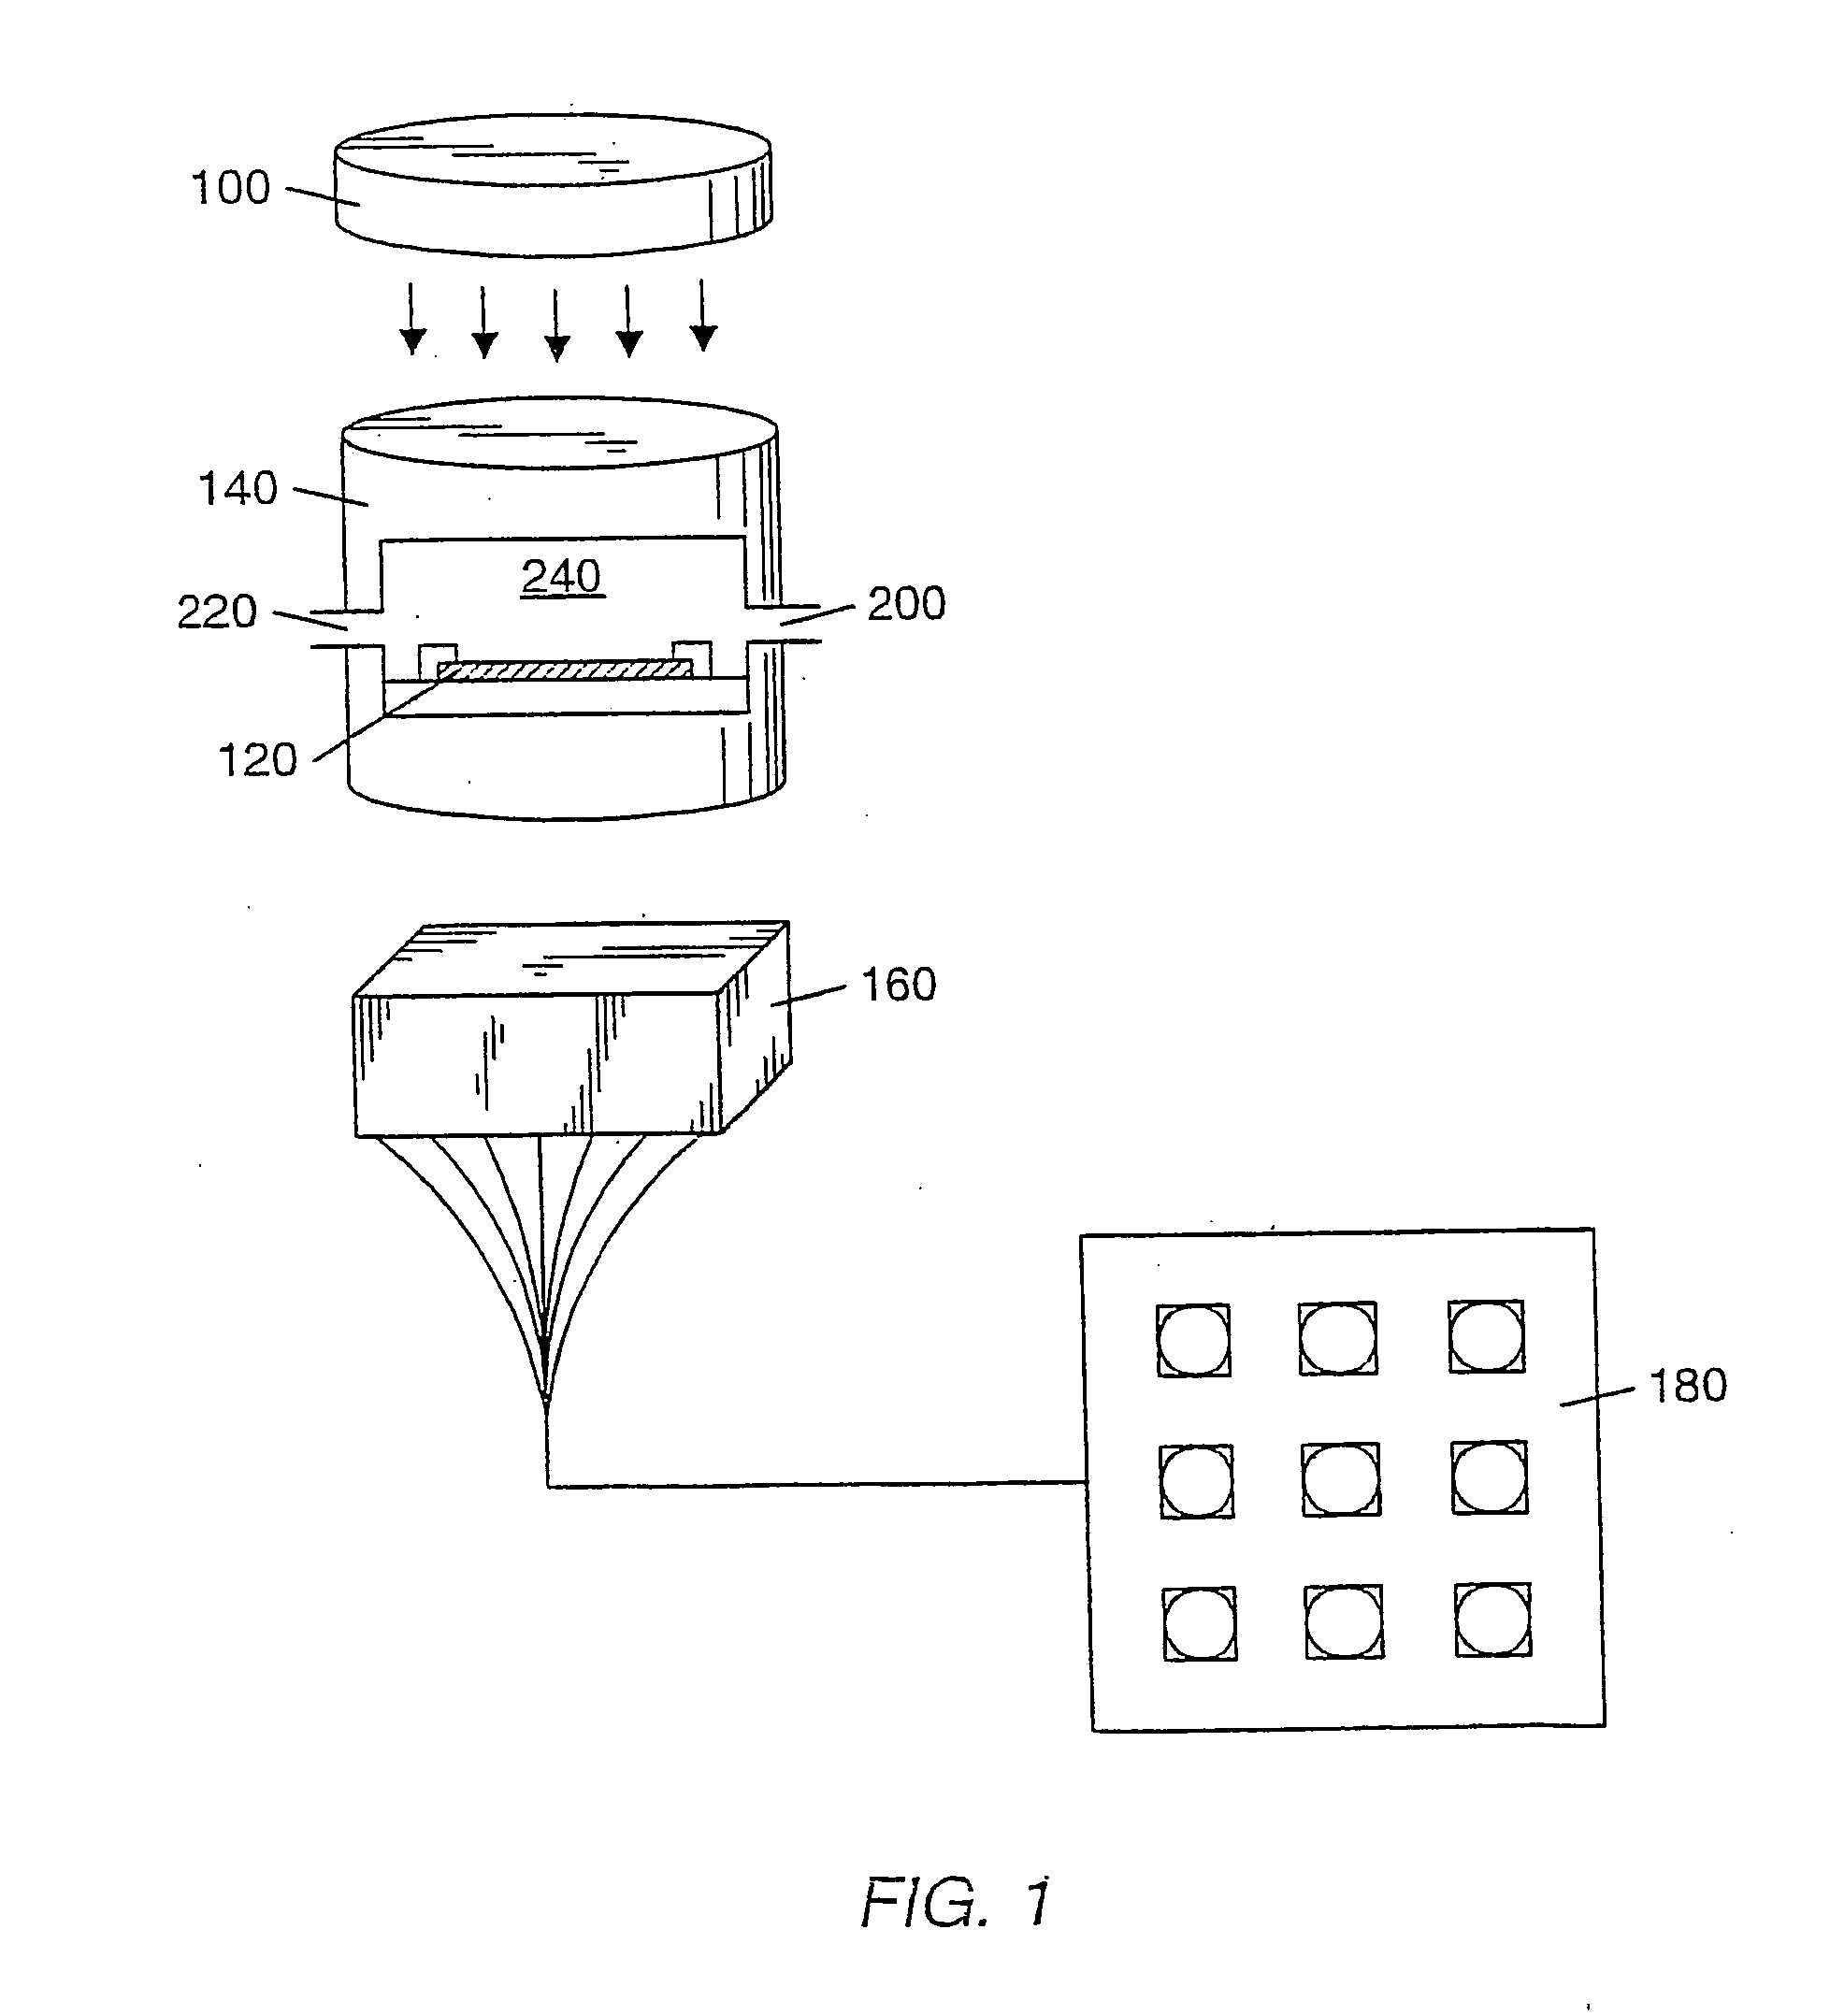 Multi-shell microspheres with integrated chomatographic and detection layers for use in array sensors